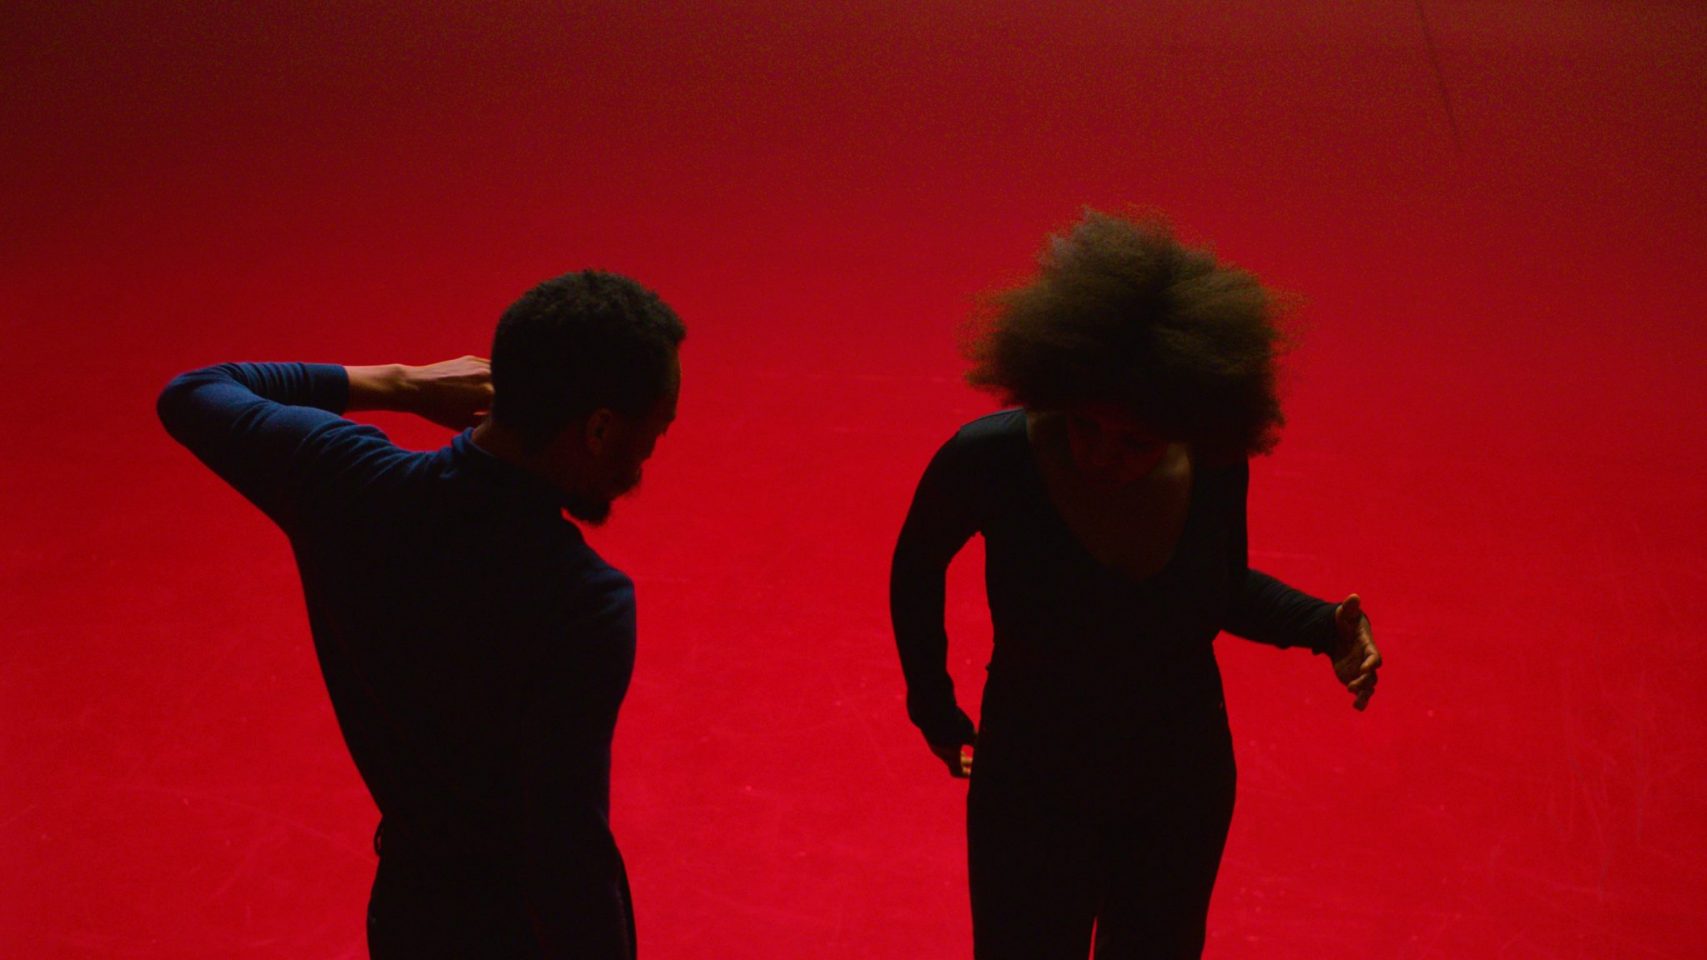 Two silhouetted bodies, dressed in black, dancing against a red backdrop